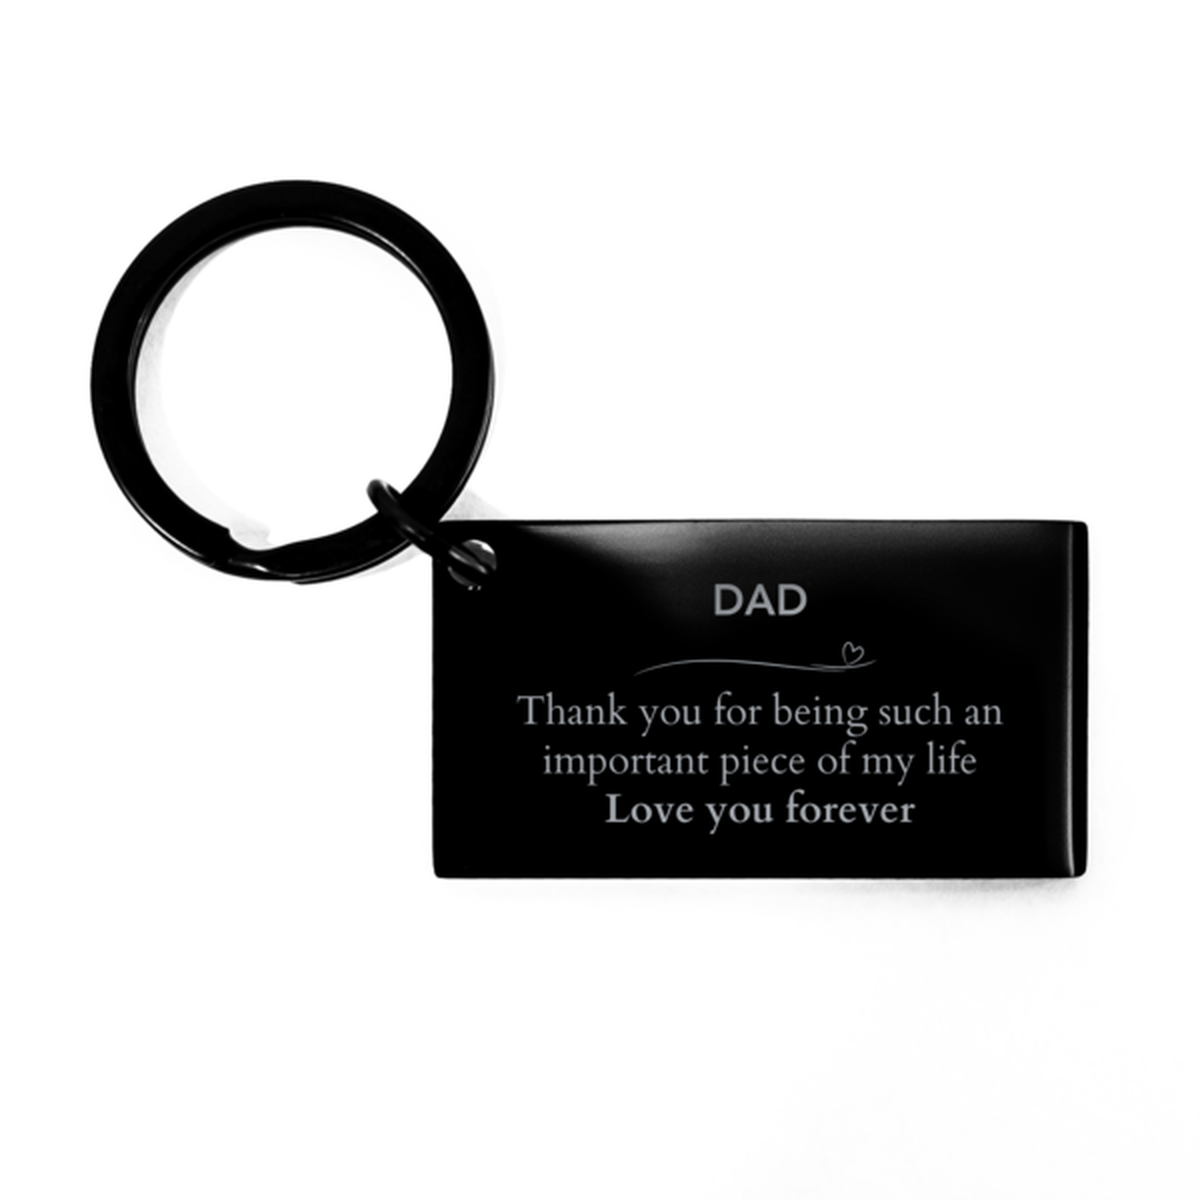 Appropriate Dad Keychain Epic Birthday Gifts for Dad Thank you for being such an important piece of my life Dad Christmas Mothers Fathers Day